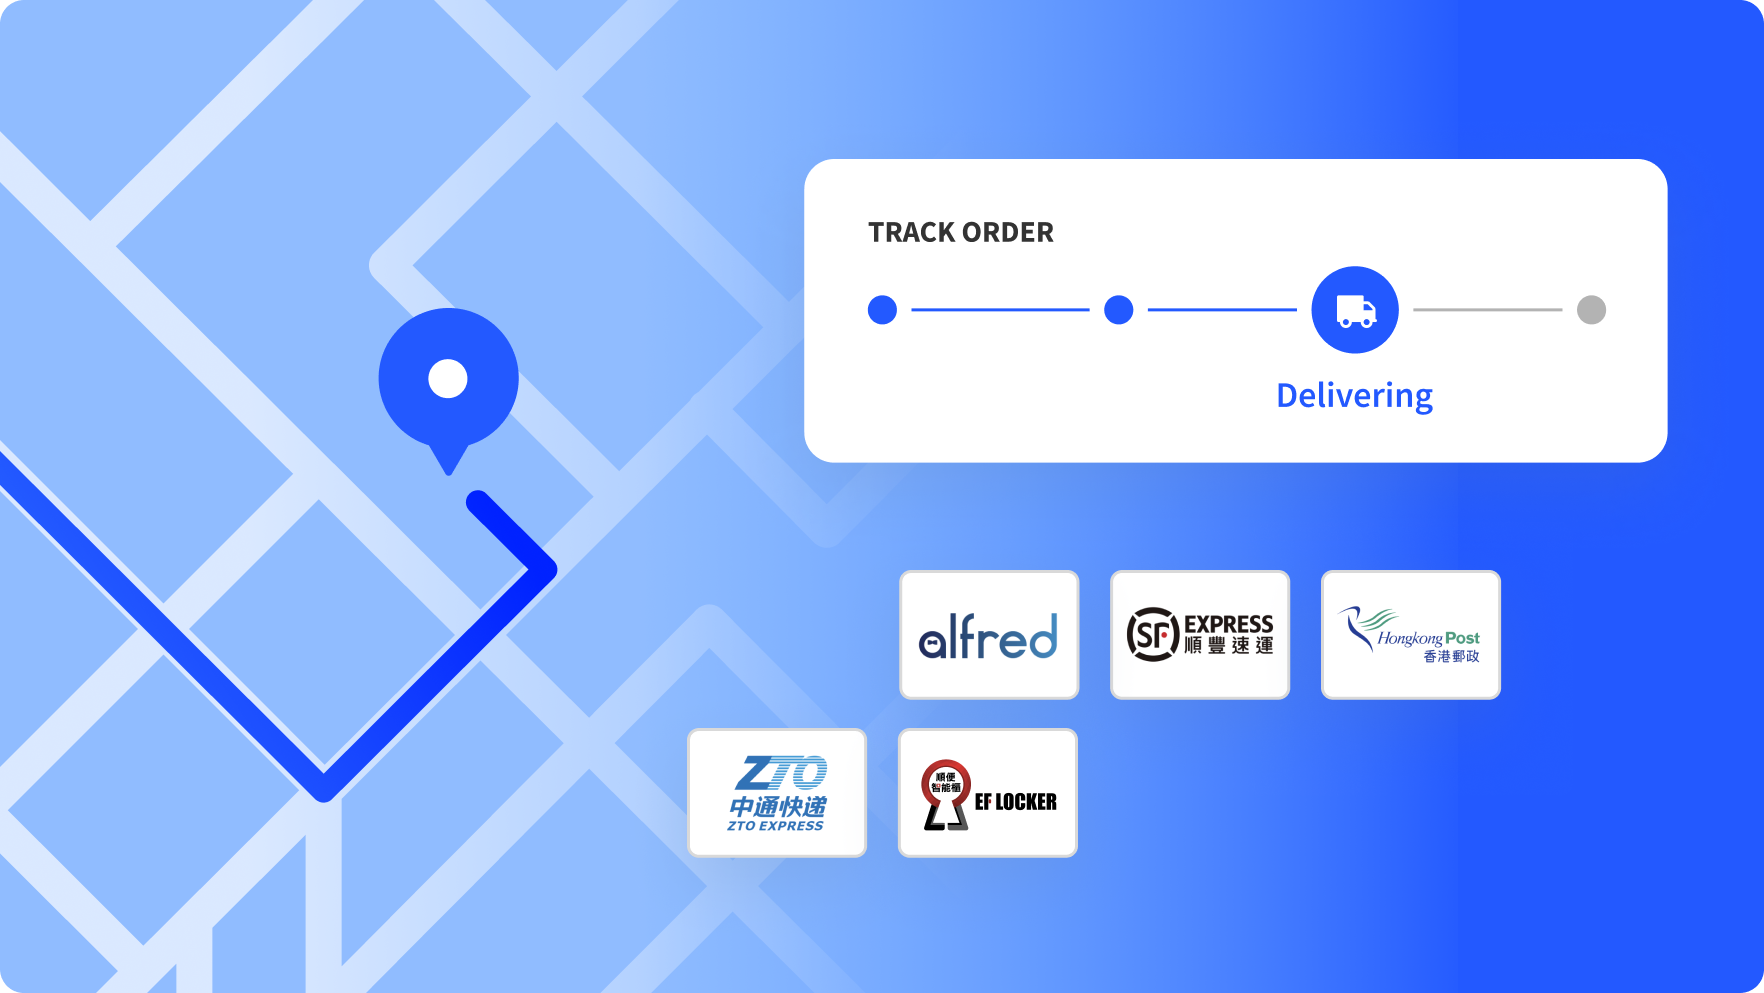 Automated order fulfillment